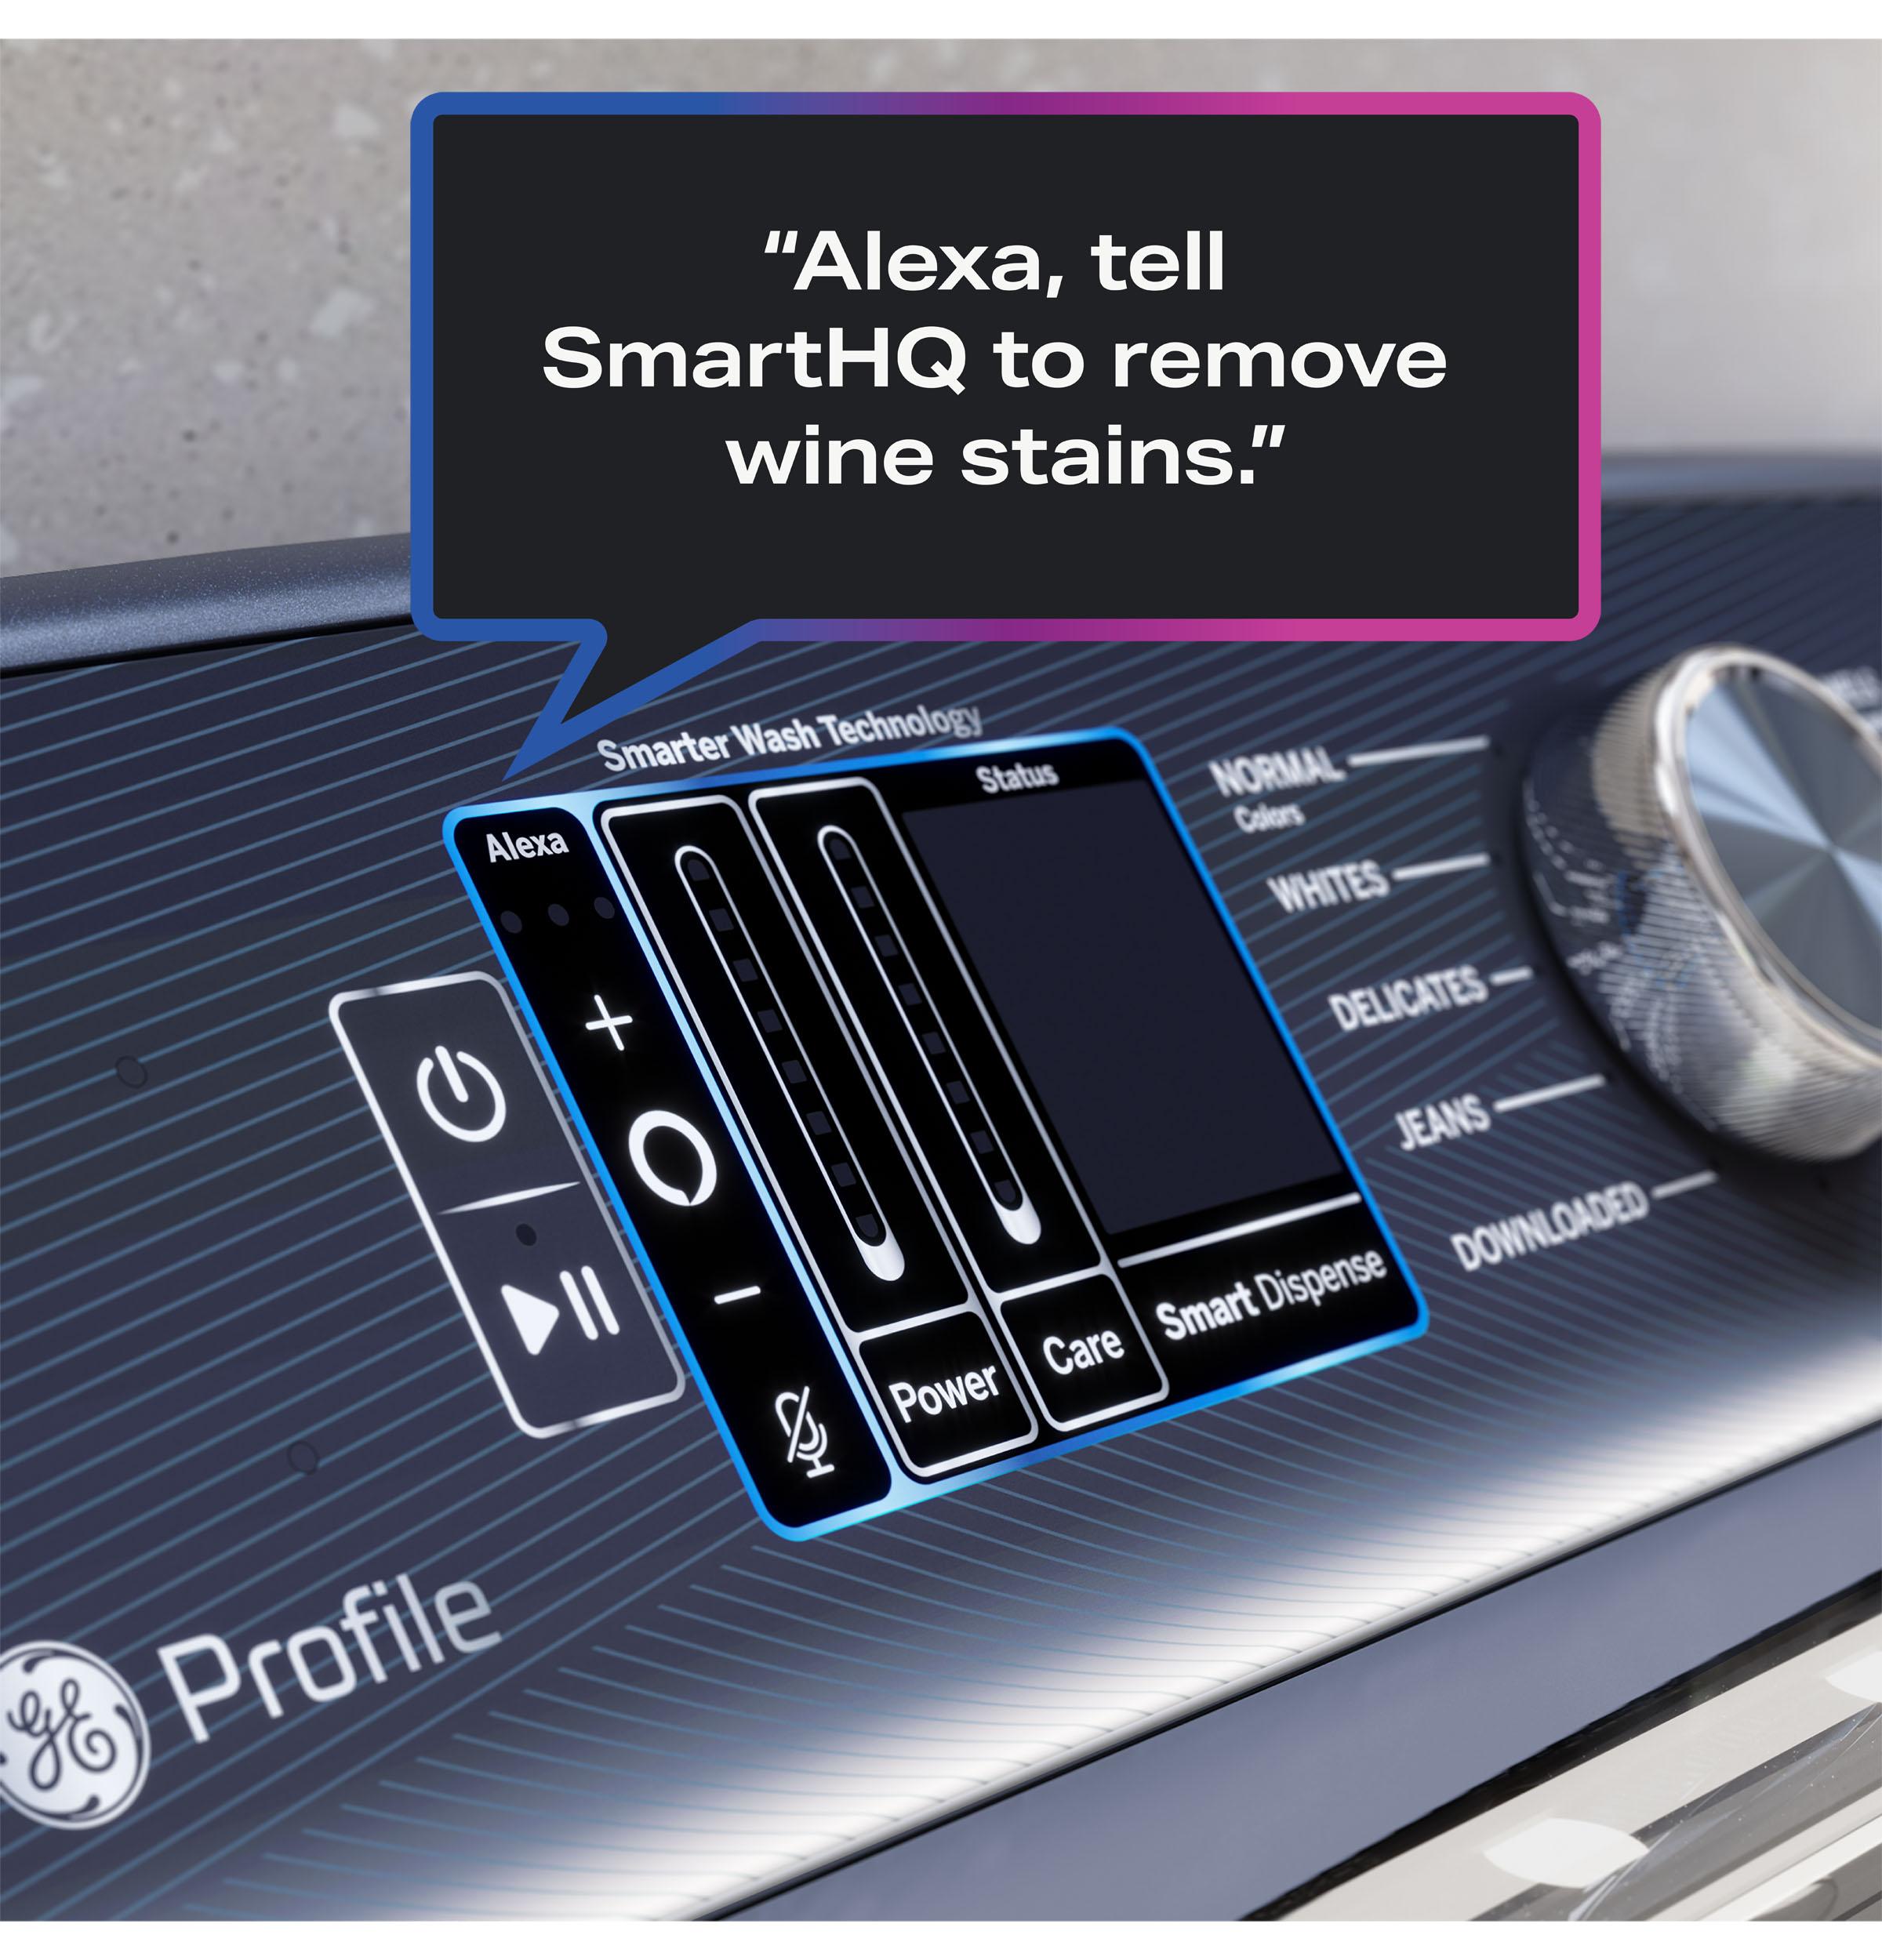 Ge Appliances PTW900BPTDG Ge Profile™ 5.4 Cu. Ft. Capacity Washer With Smarter Wash Technology And Flexdispense™